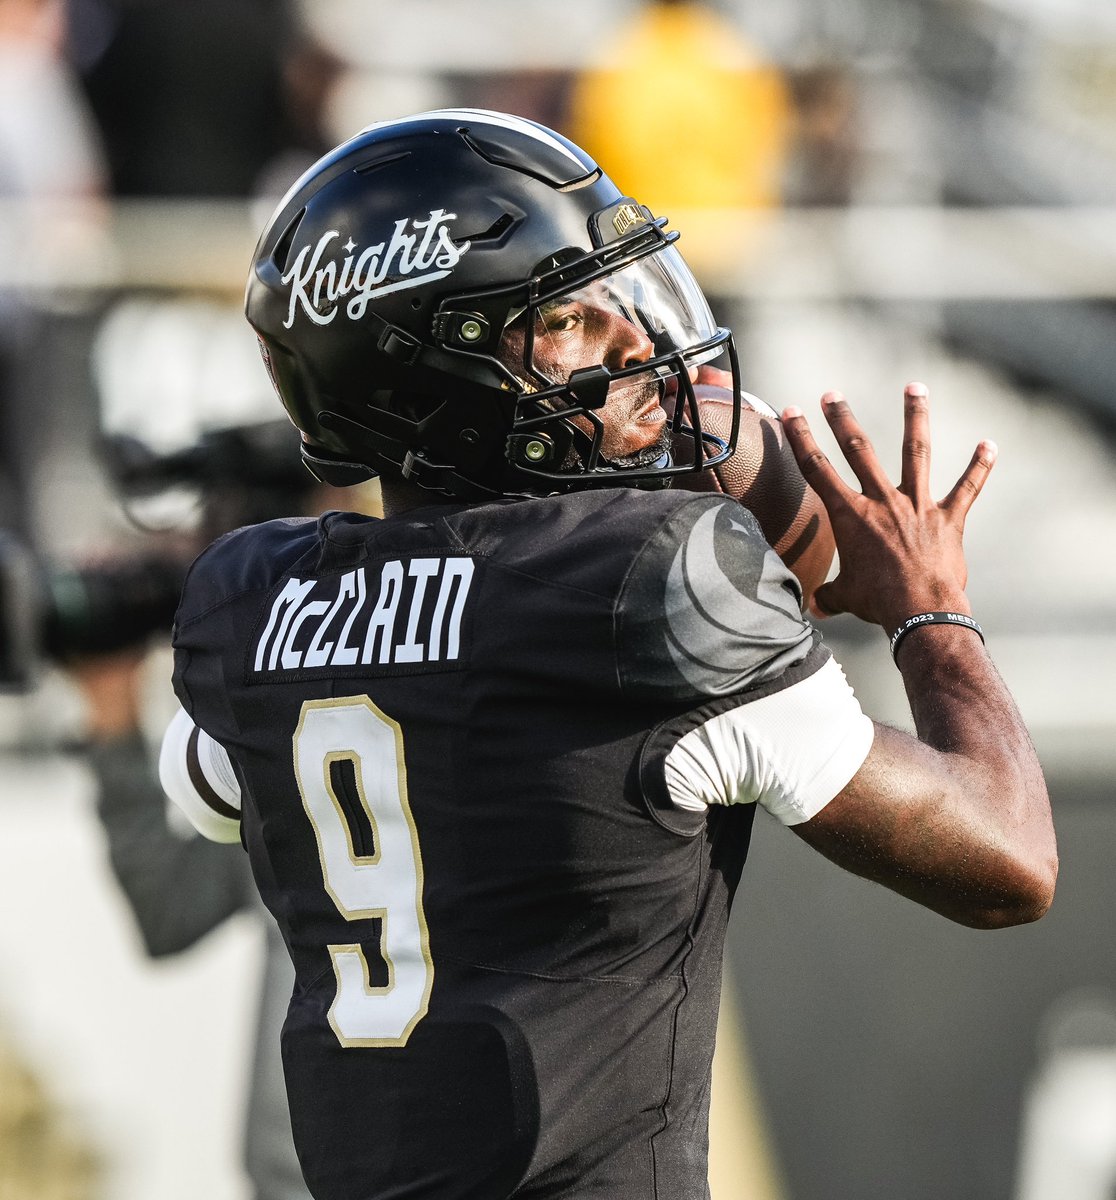 UCF quarterback Timmy McClain is expected to enter the transfer portal, sources tell @247Sports. McClain made three starts for UCF last season and accounted for six total touchdowns vs. Kansas State and Baylor. Before UCF, he was the starting QB at USF. 247sports.com/player/timmy-m…